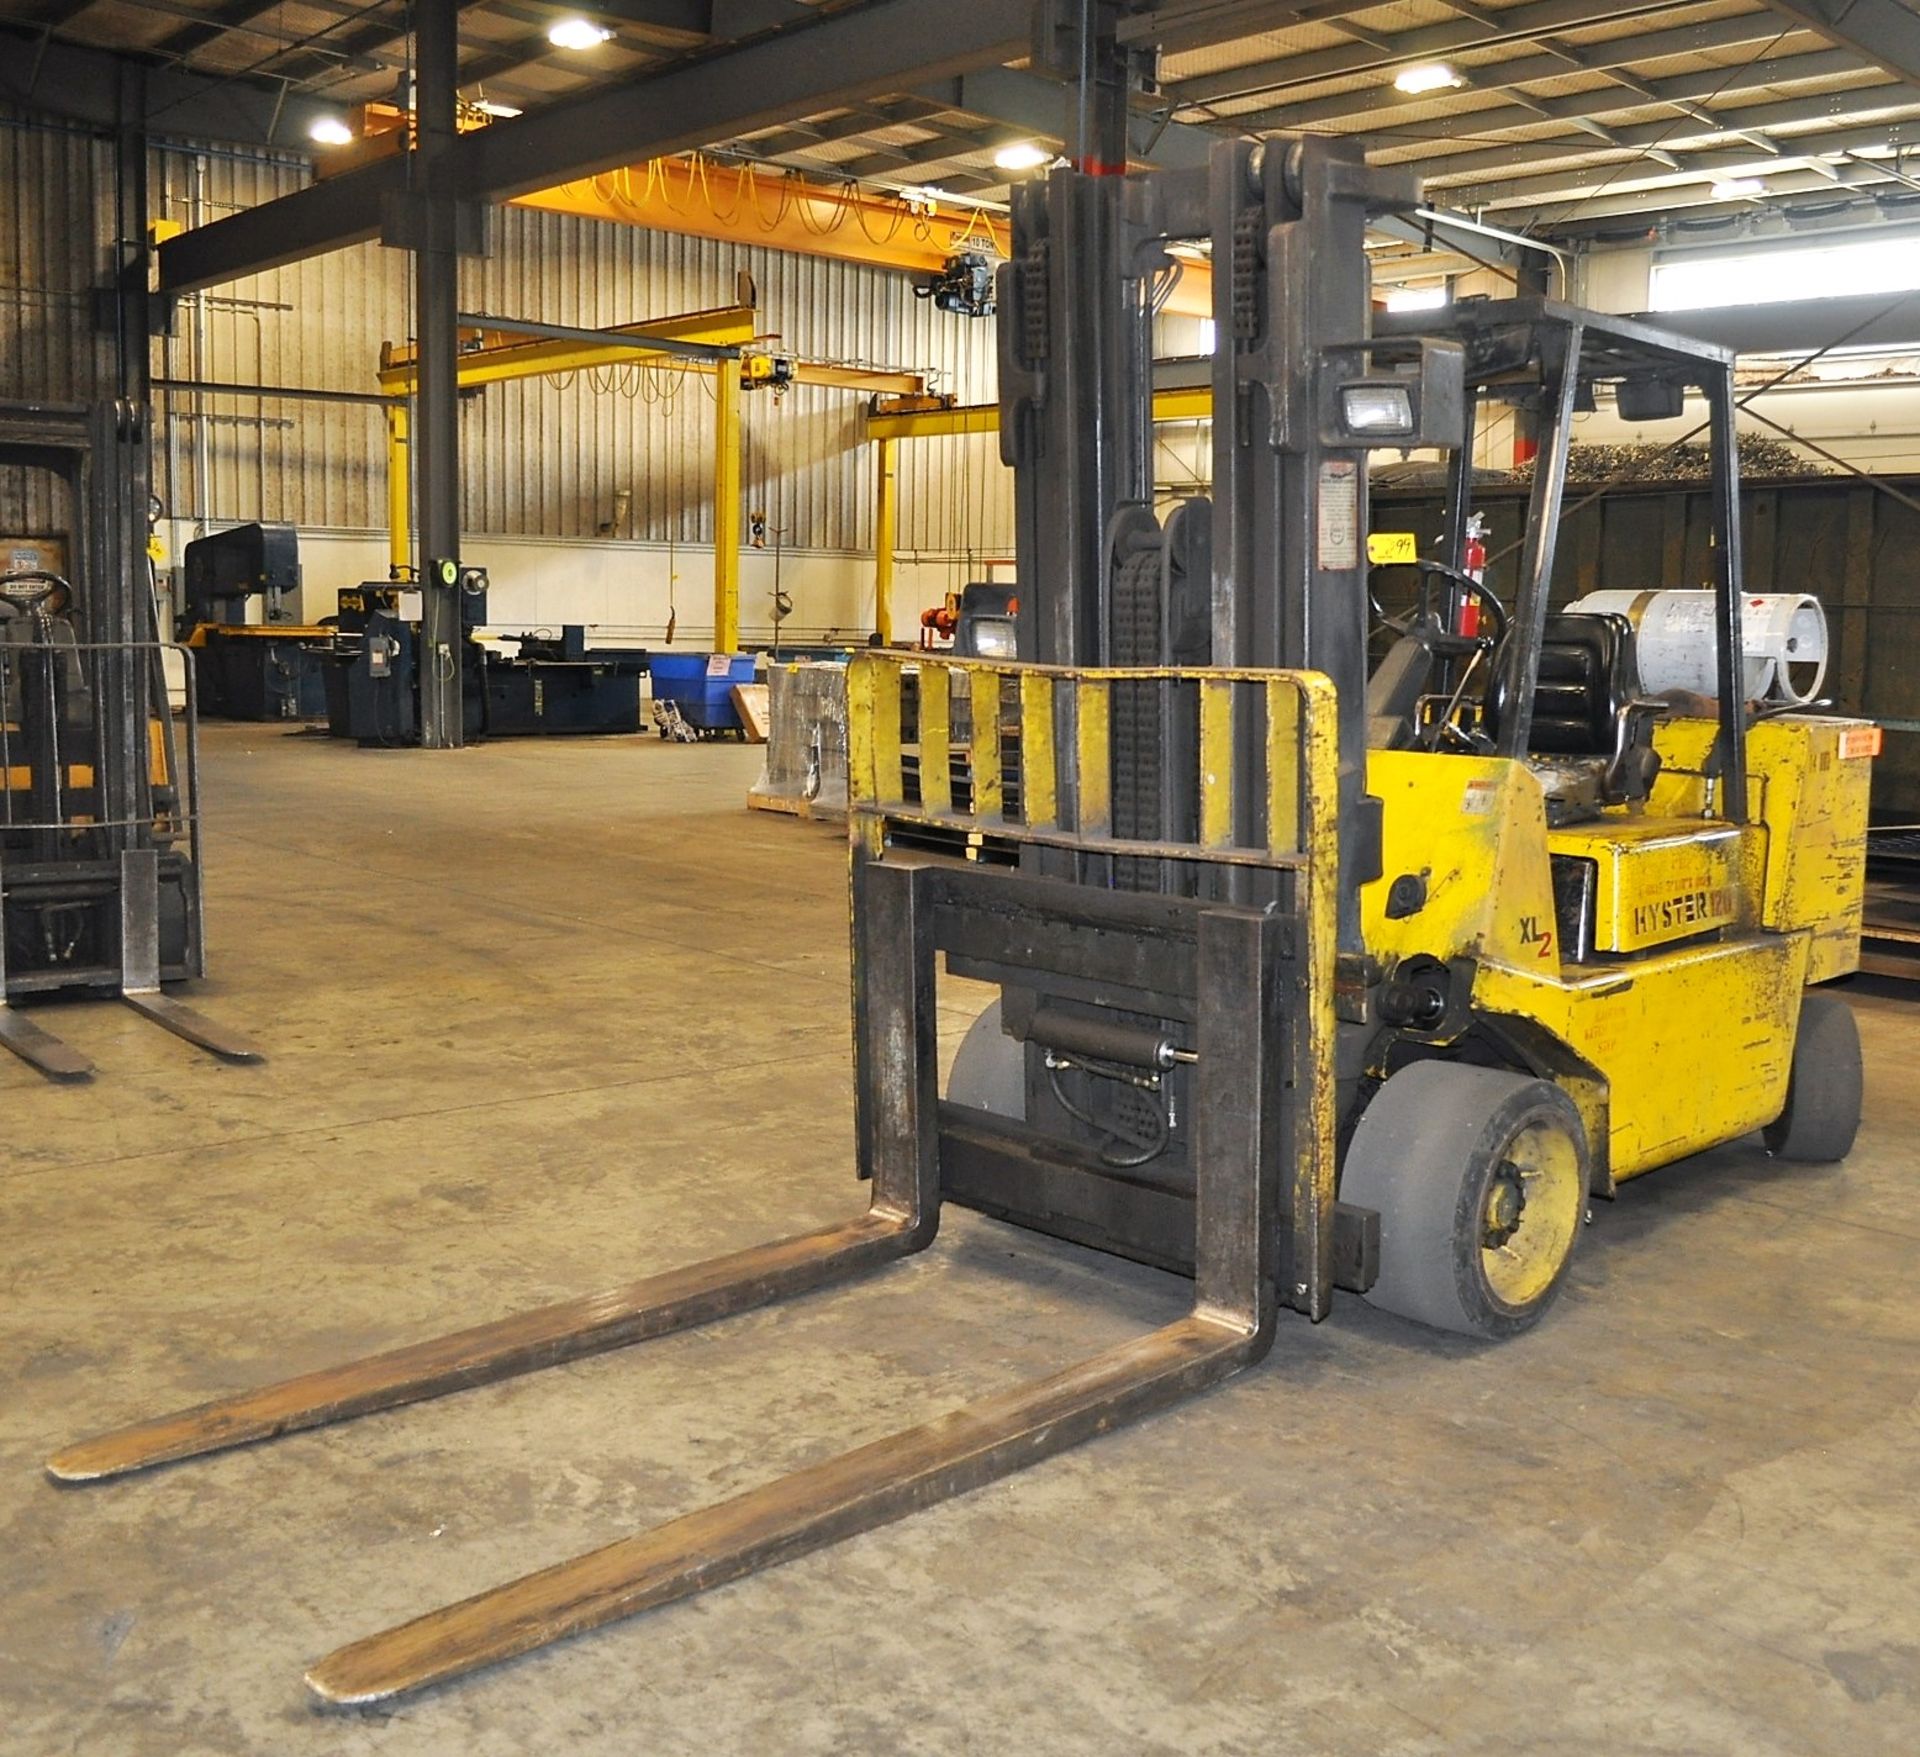 HYSTER MDL. S120XLS 11,700# CAPACITY PROPANE FORKLIFT TRUCK, WITH 184" LIFT, SOLID TIRES, SIDE